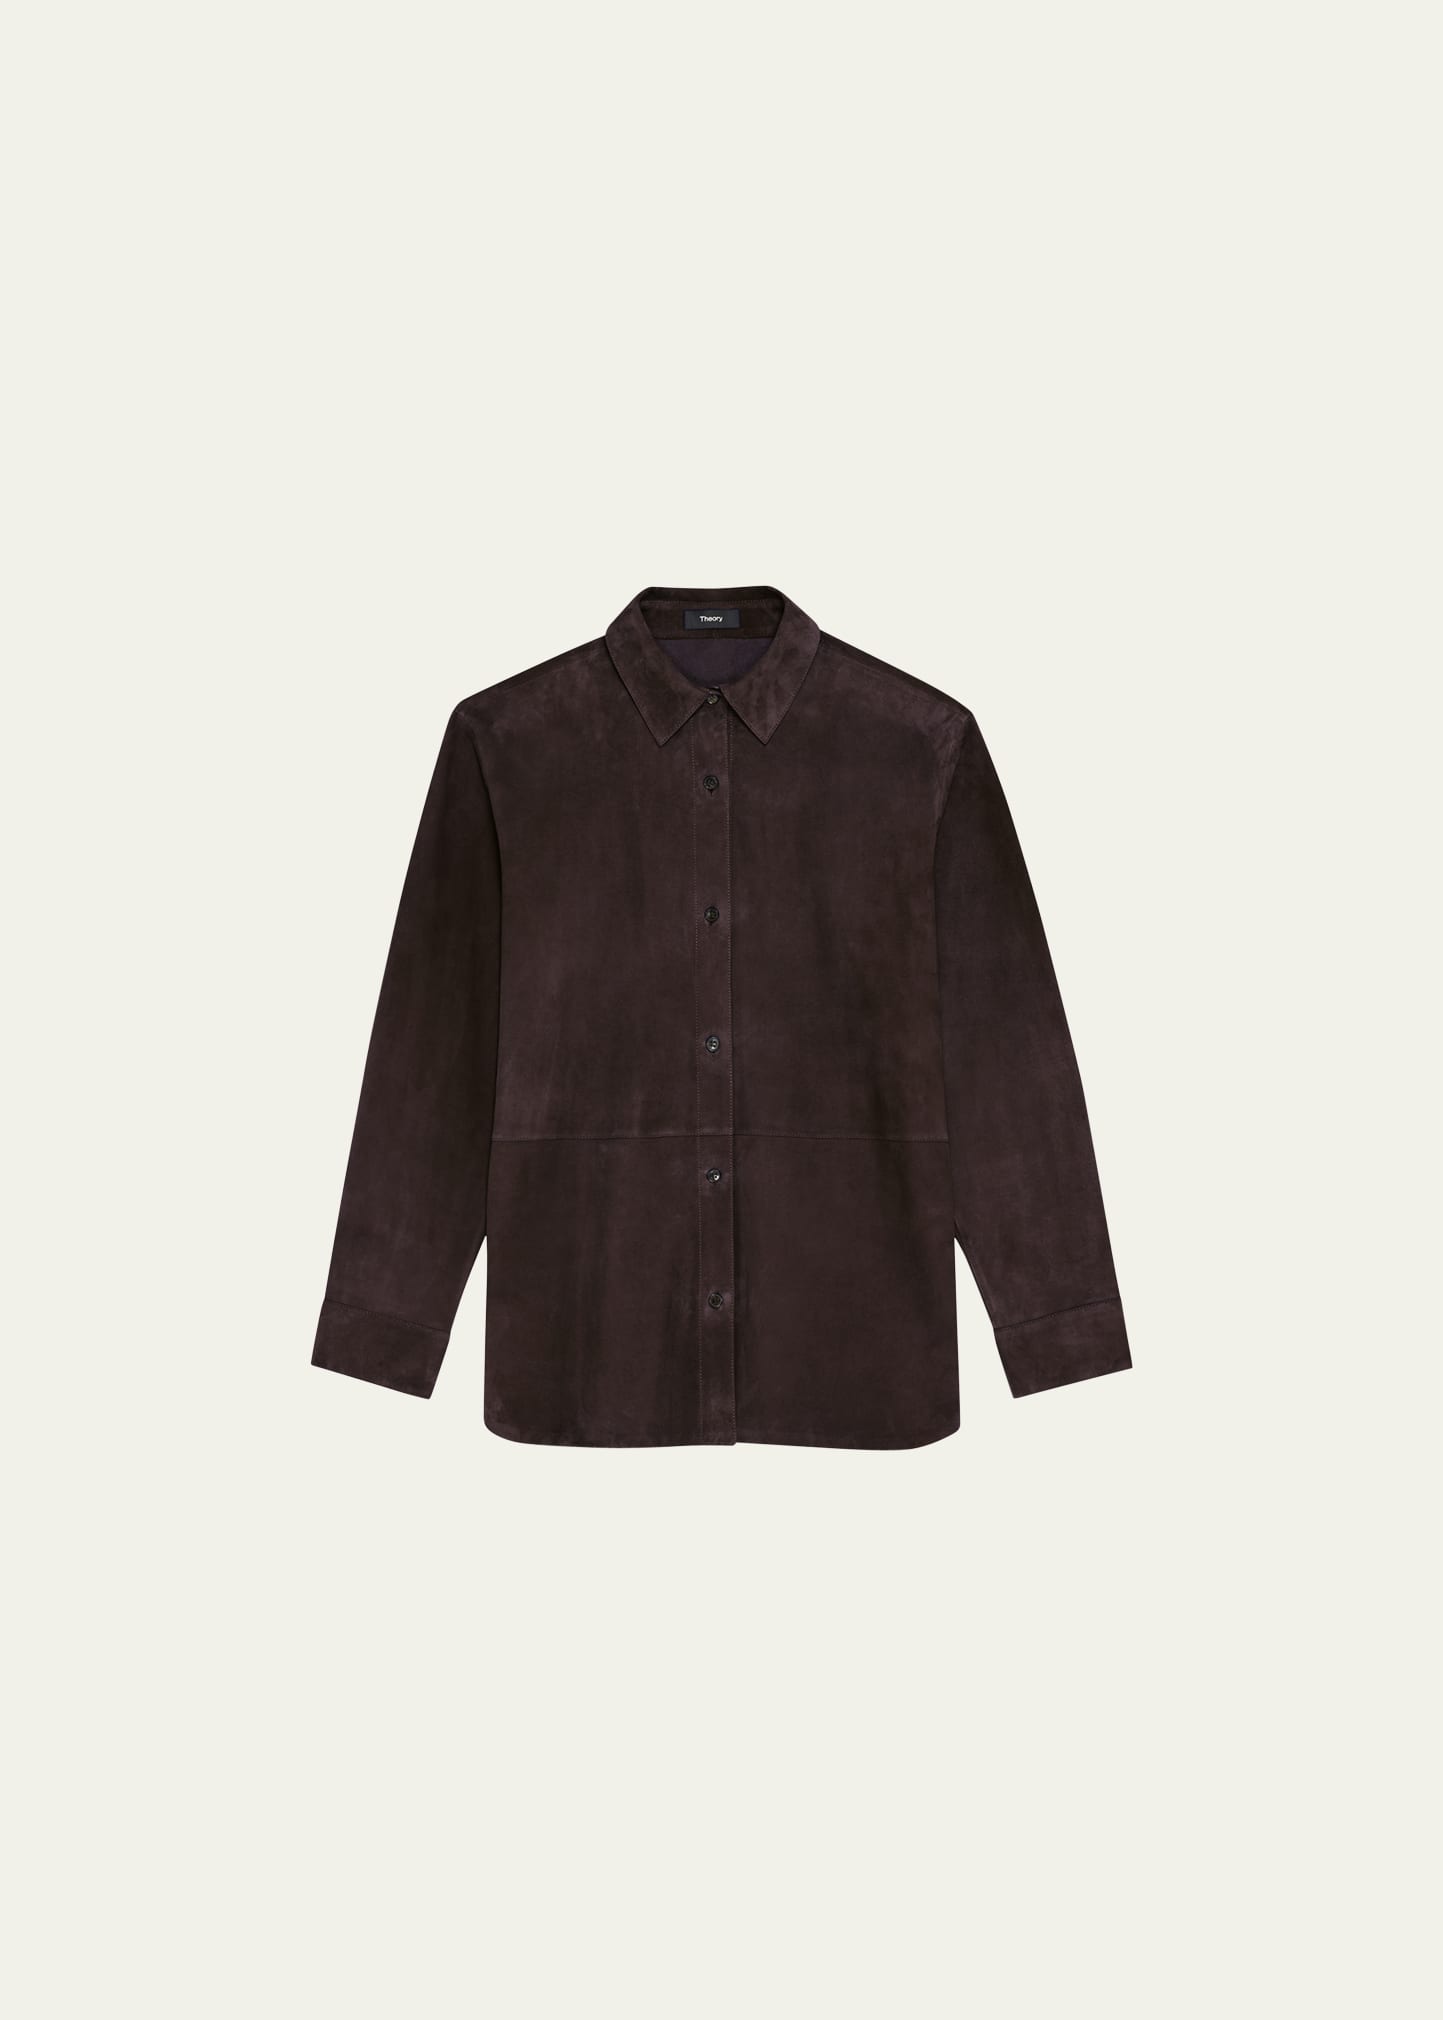 THEORY REECE LEATHER BUTTON-FRONT SHIRT